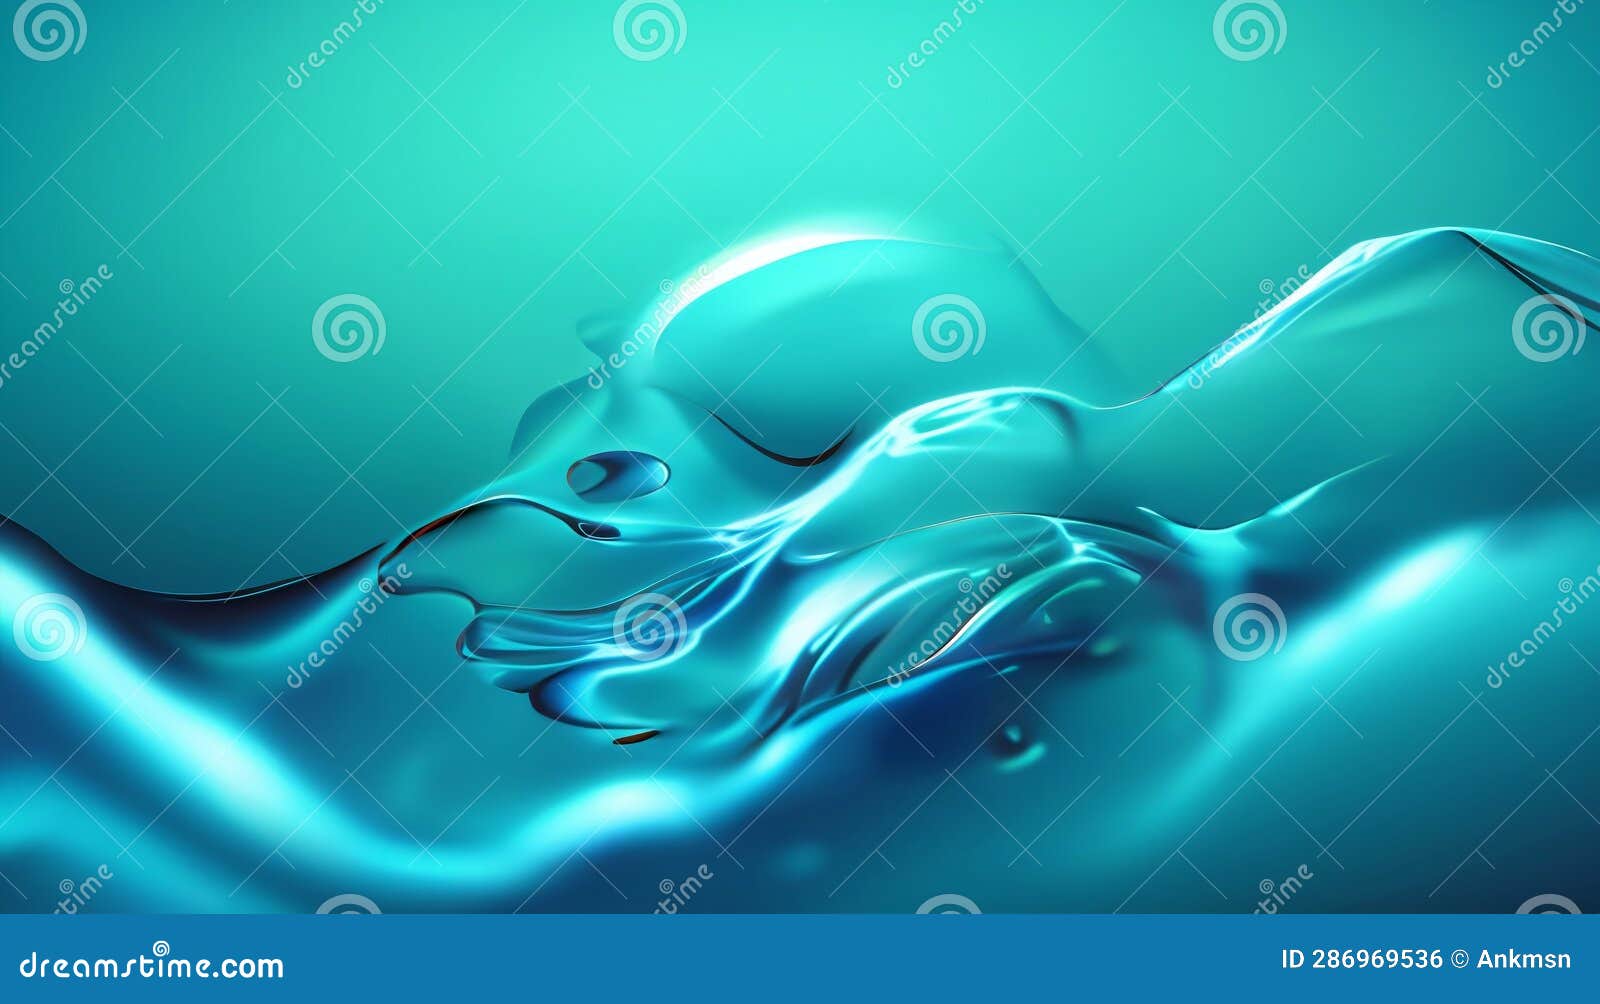 Abstract Blue Water Waves Background With Liquid Fluid Texture Stock